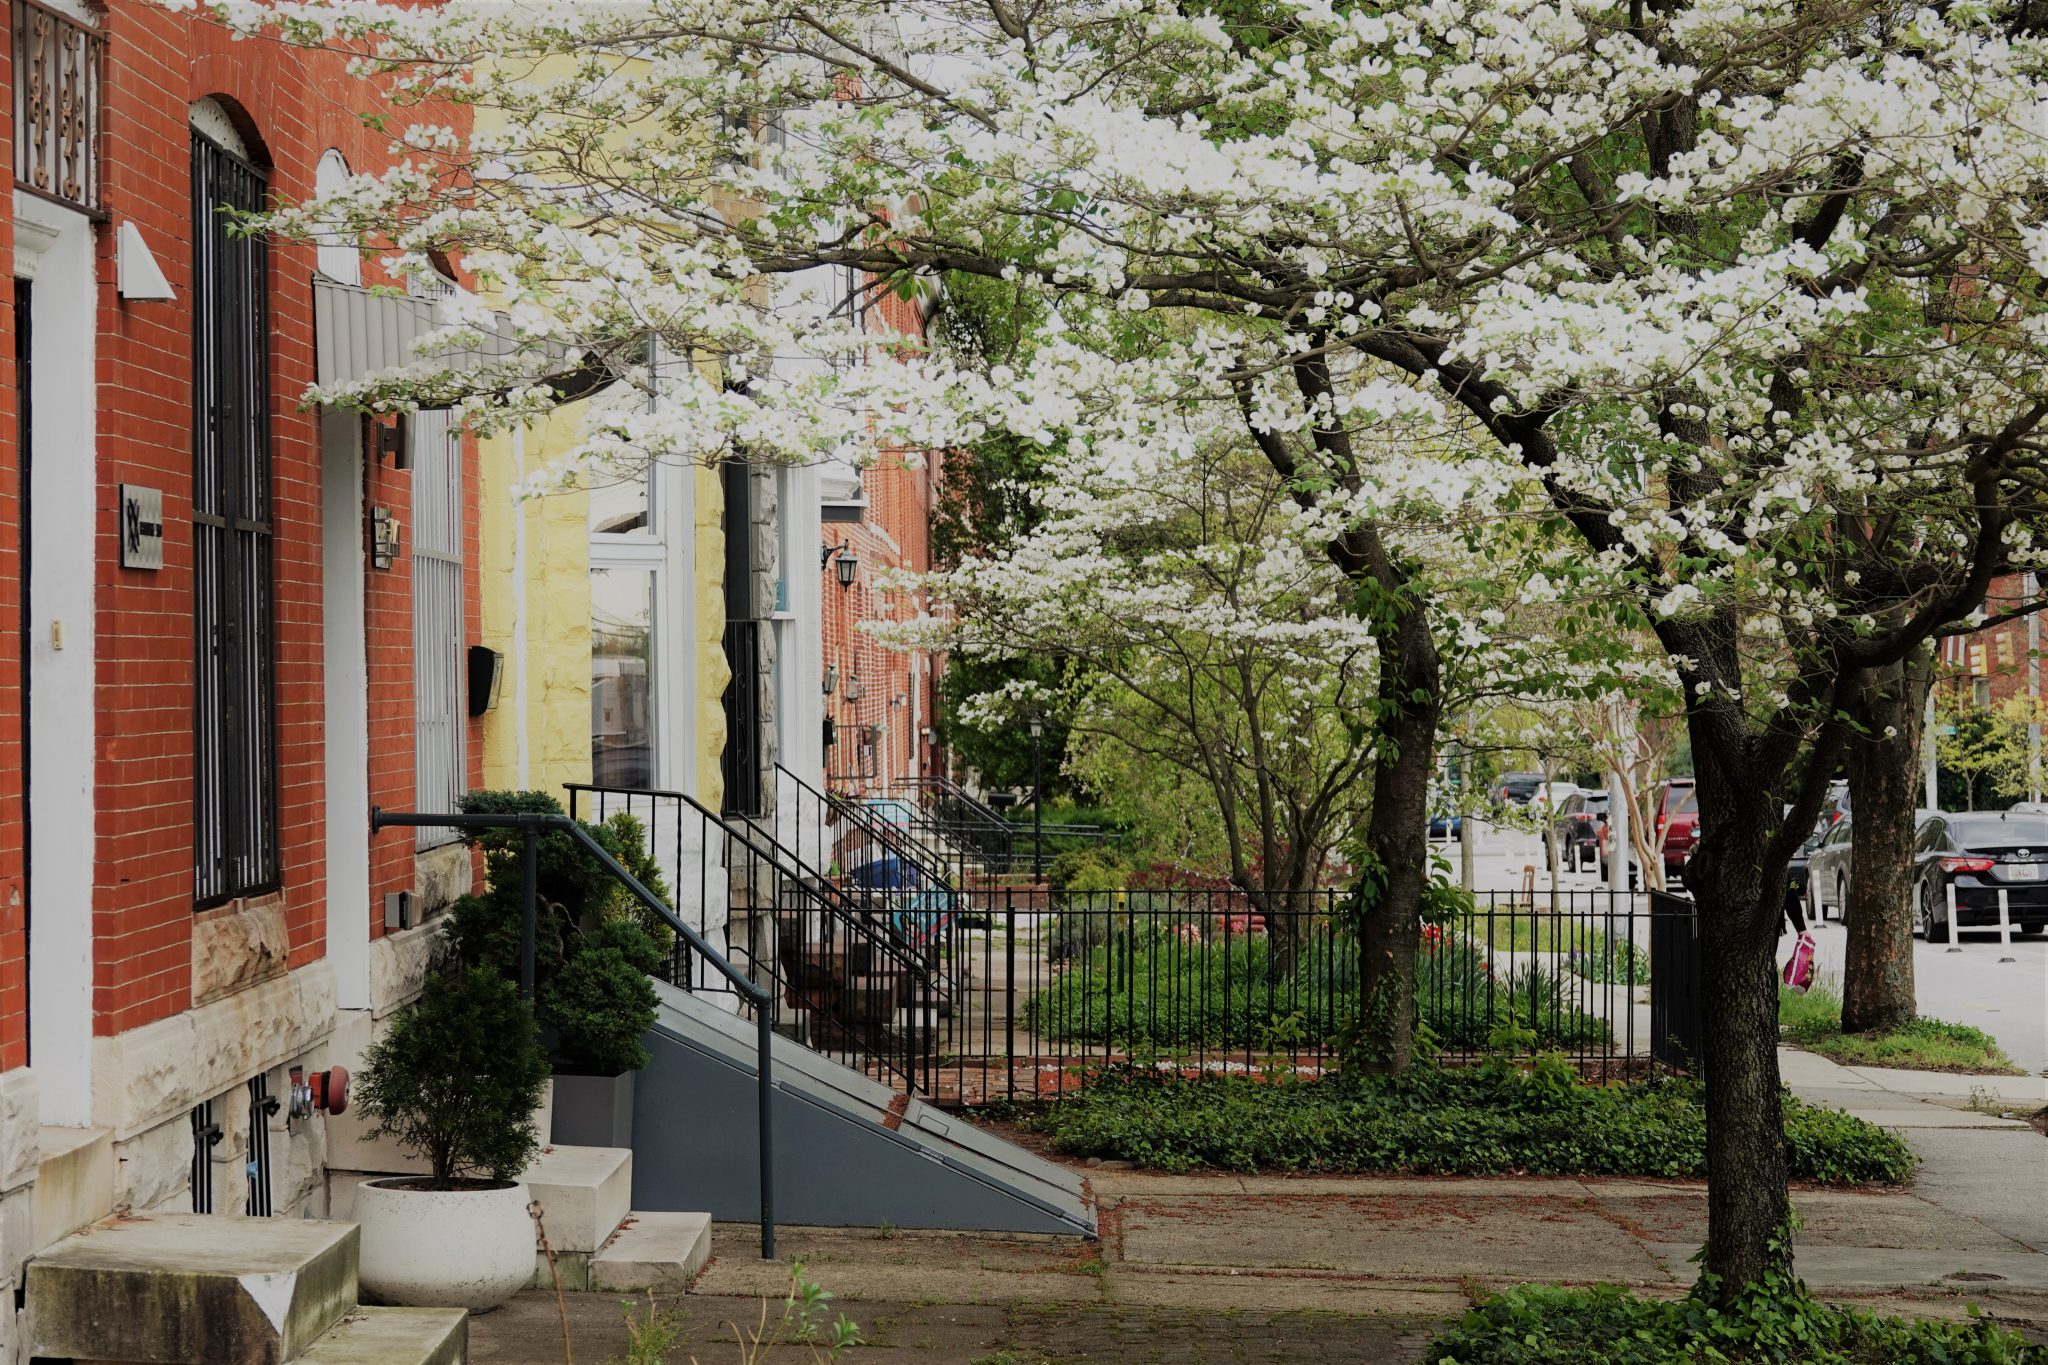 A spring tree in bloom in front of rowhomes